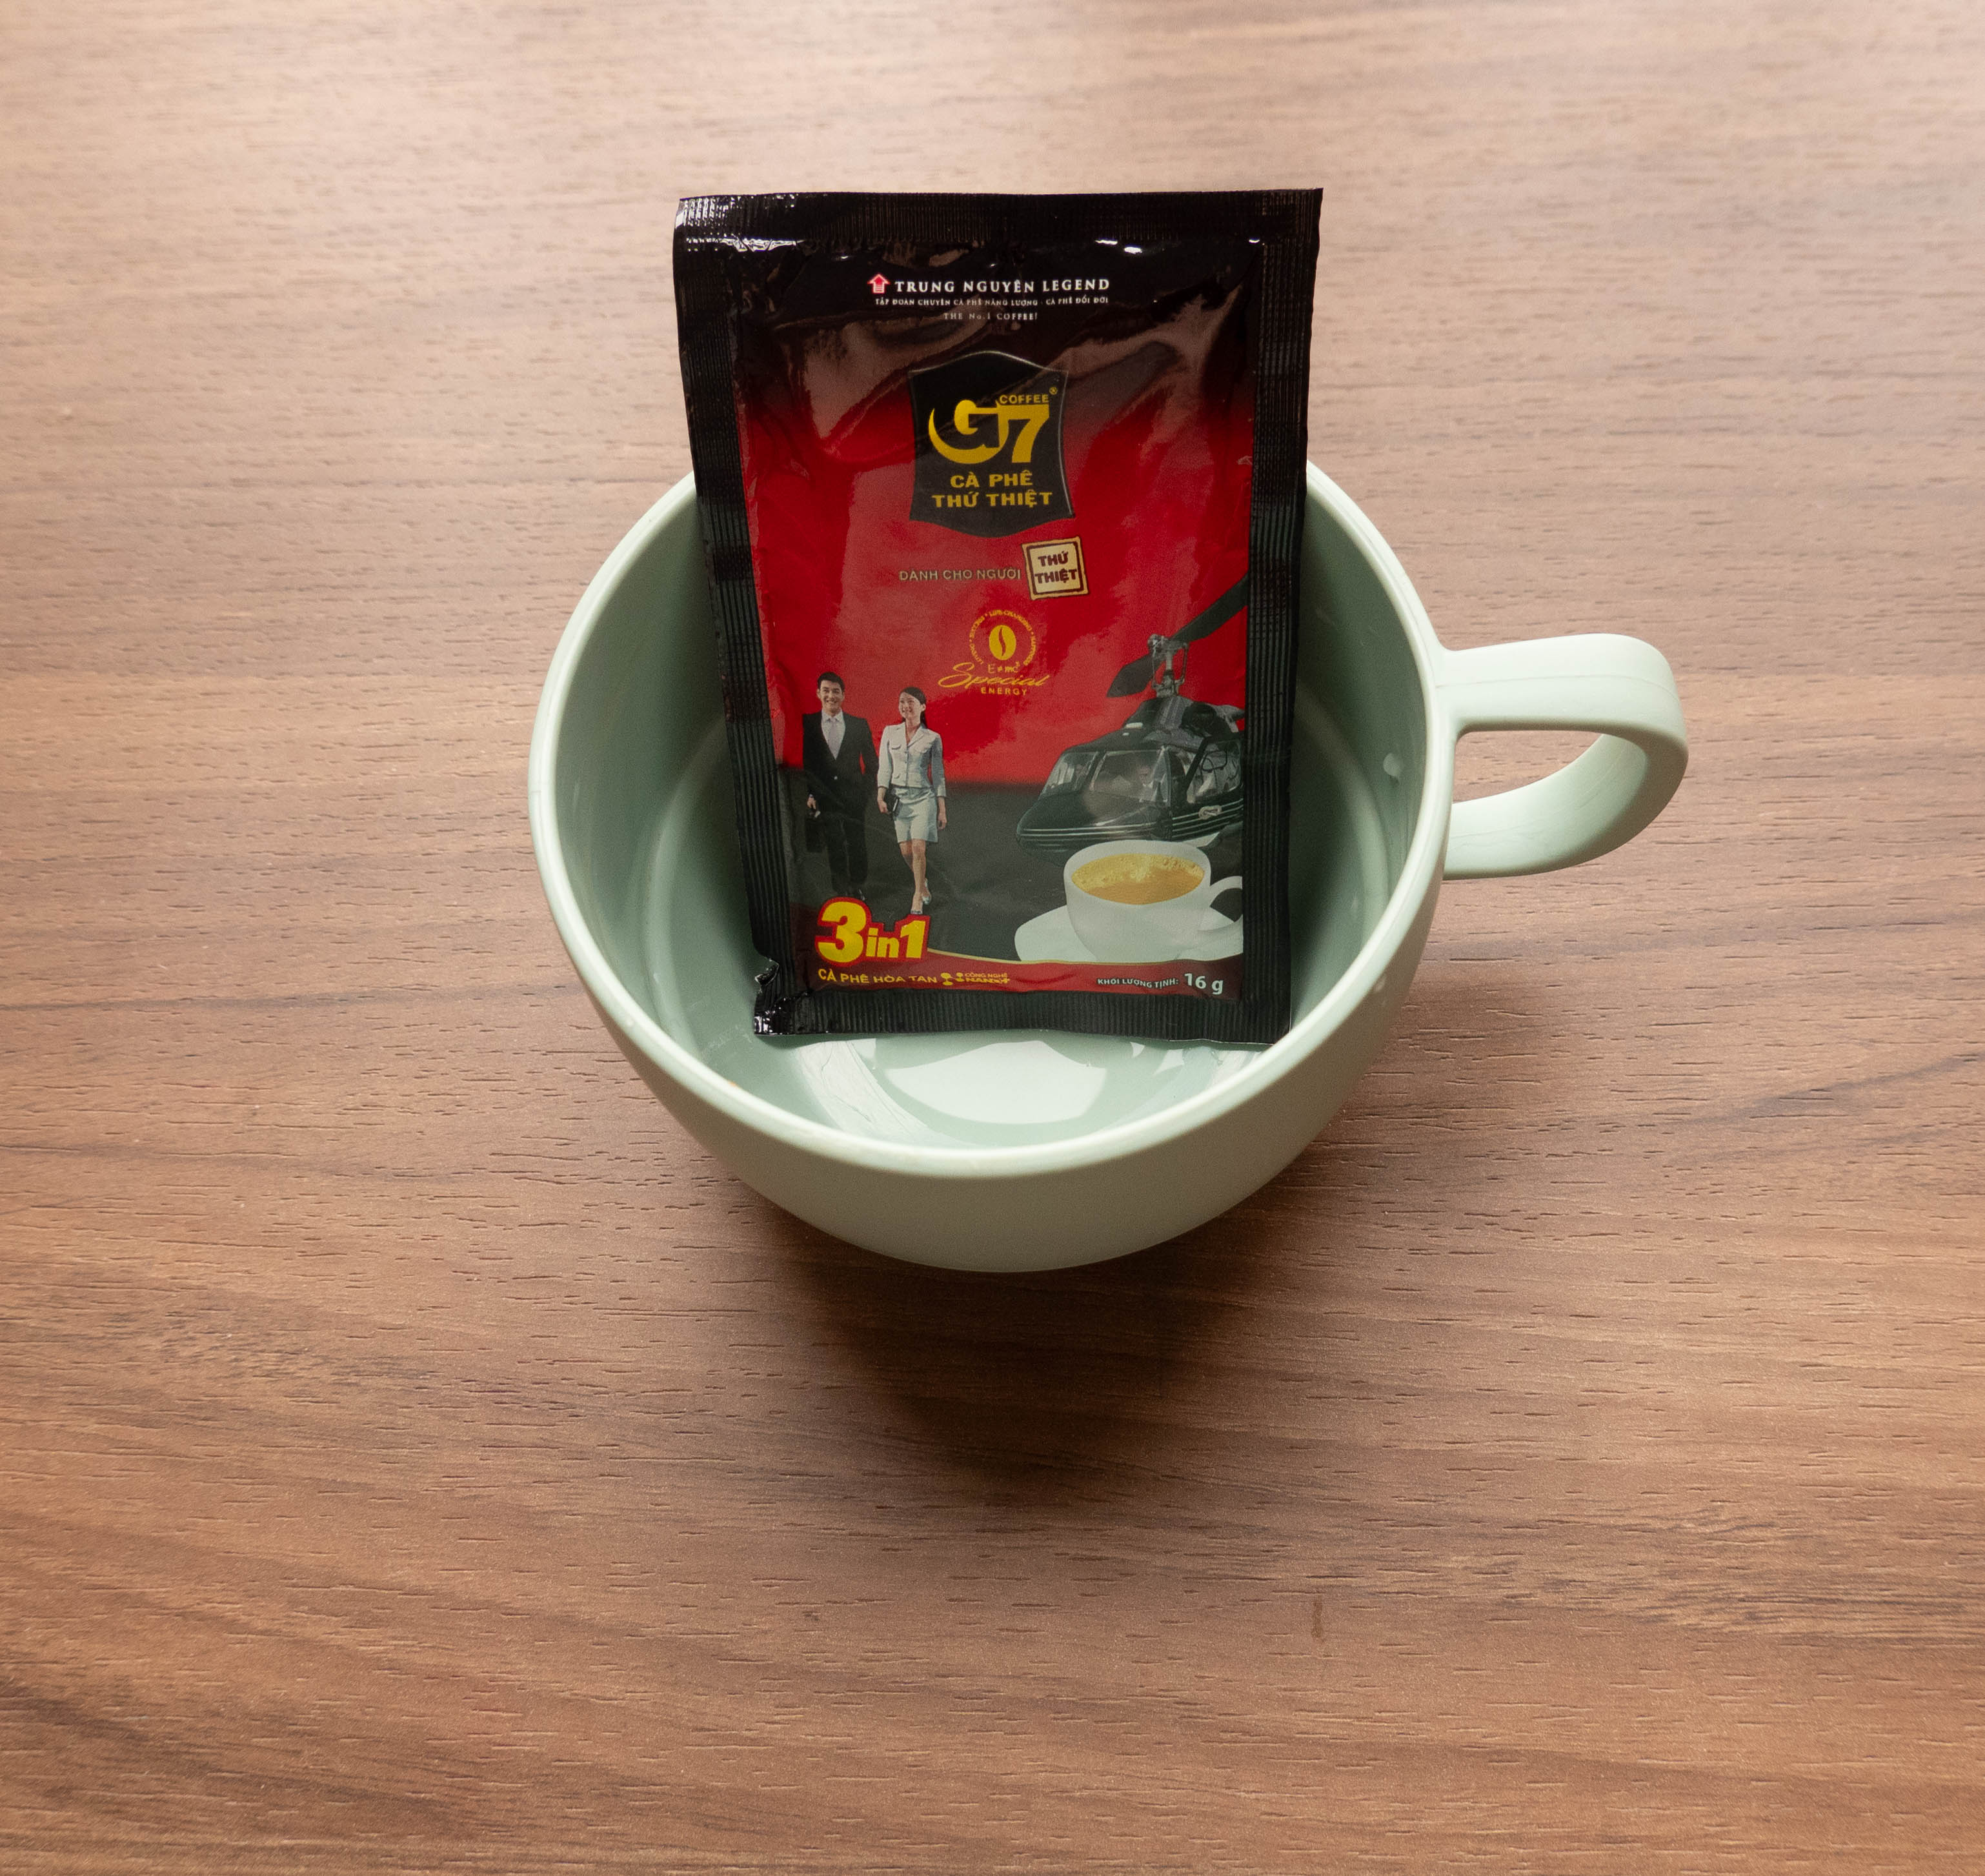 Light green coffee cup with unopened package of G7 instant coffee inside cup 